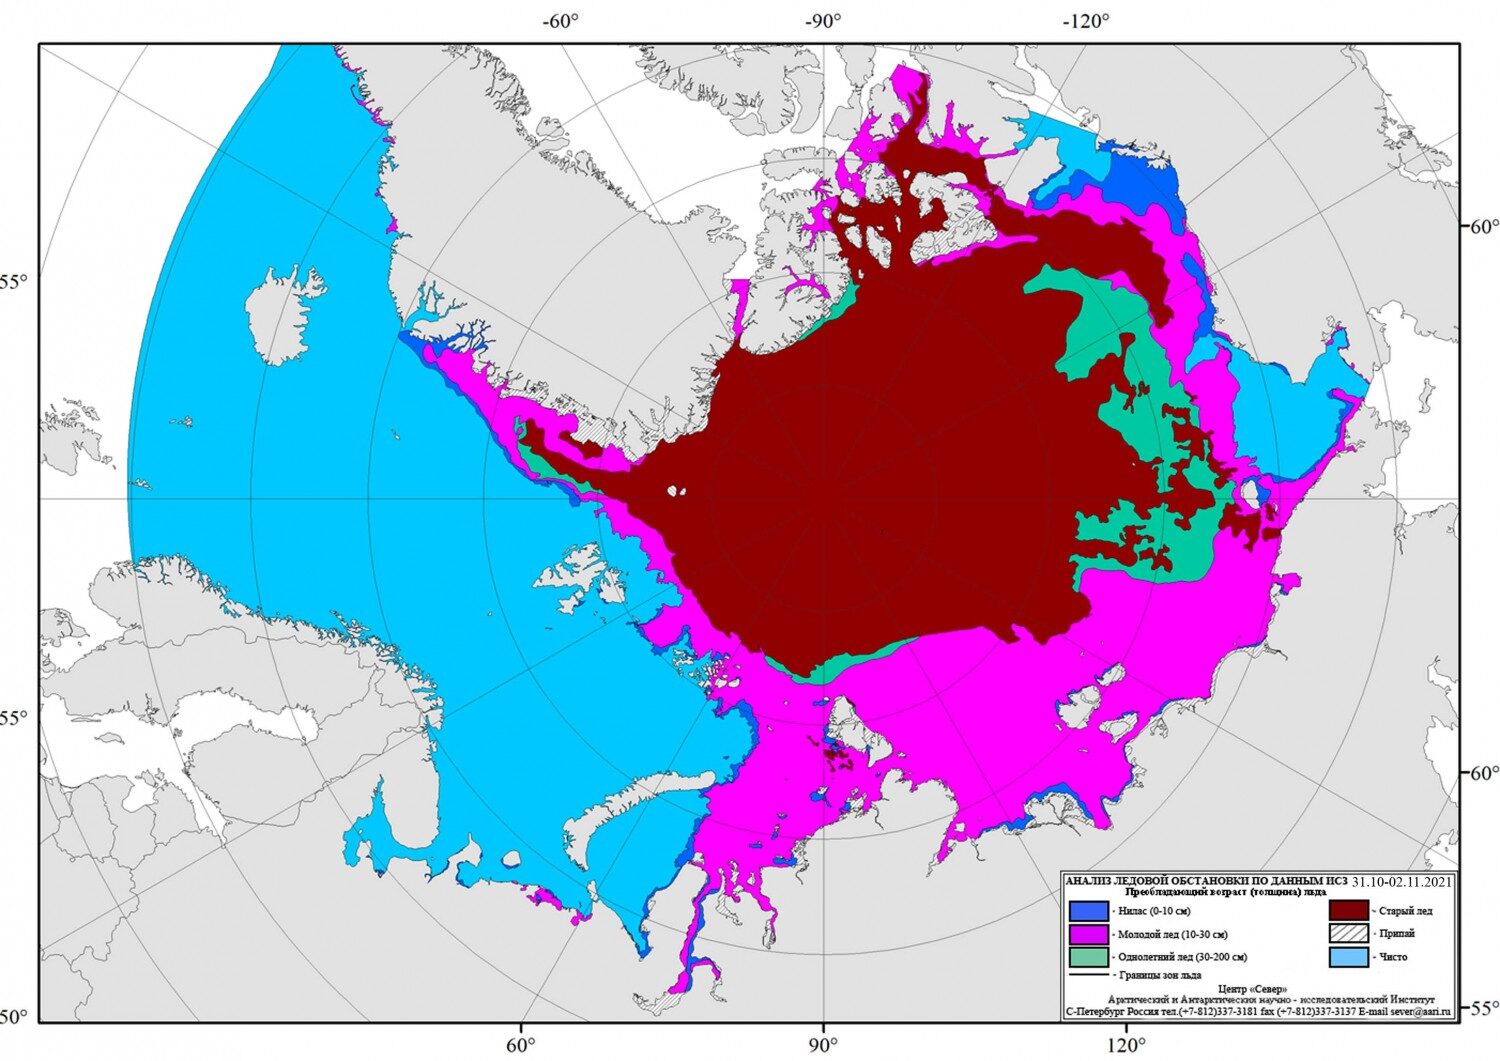 Sea-ice on the Northern Sea Route in the period 31st of October - 2nd of November.